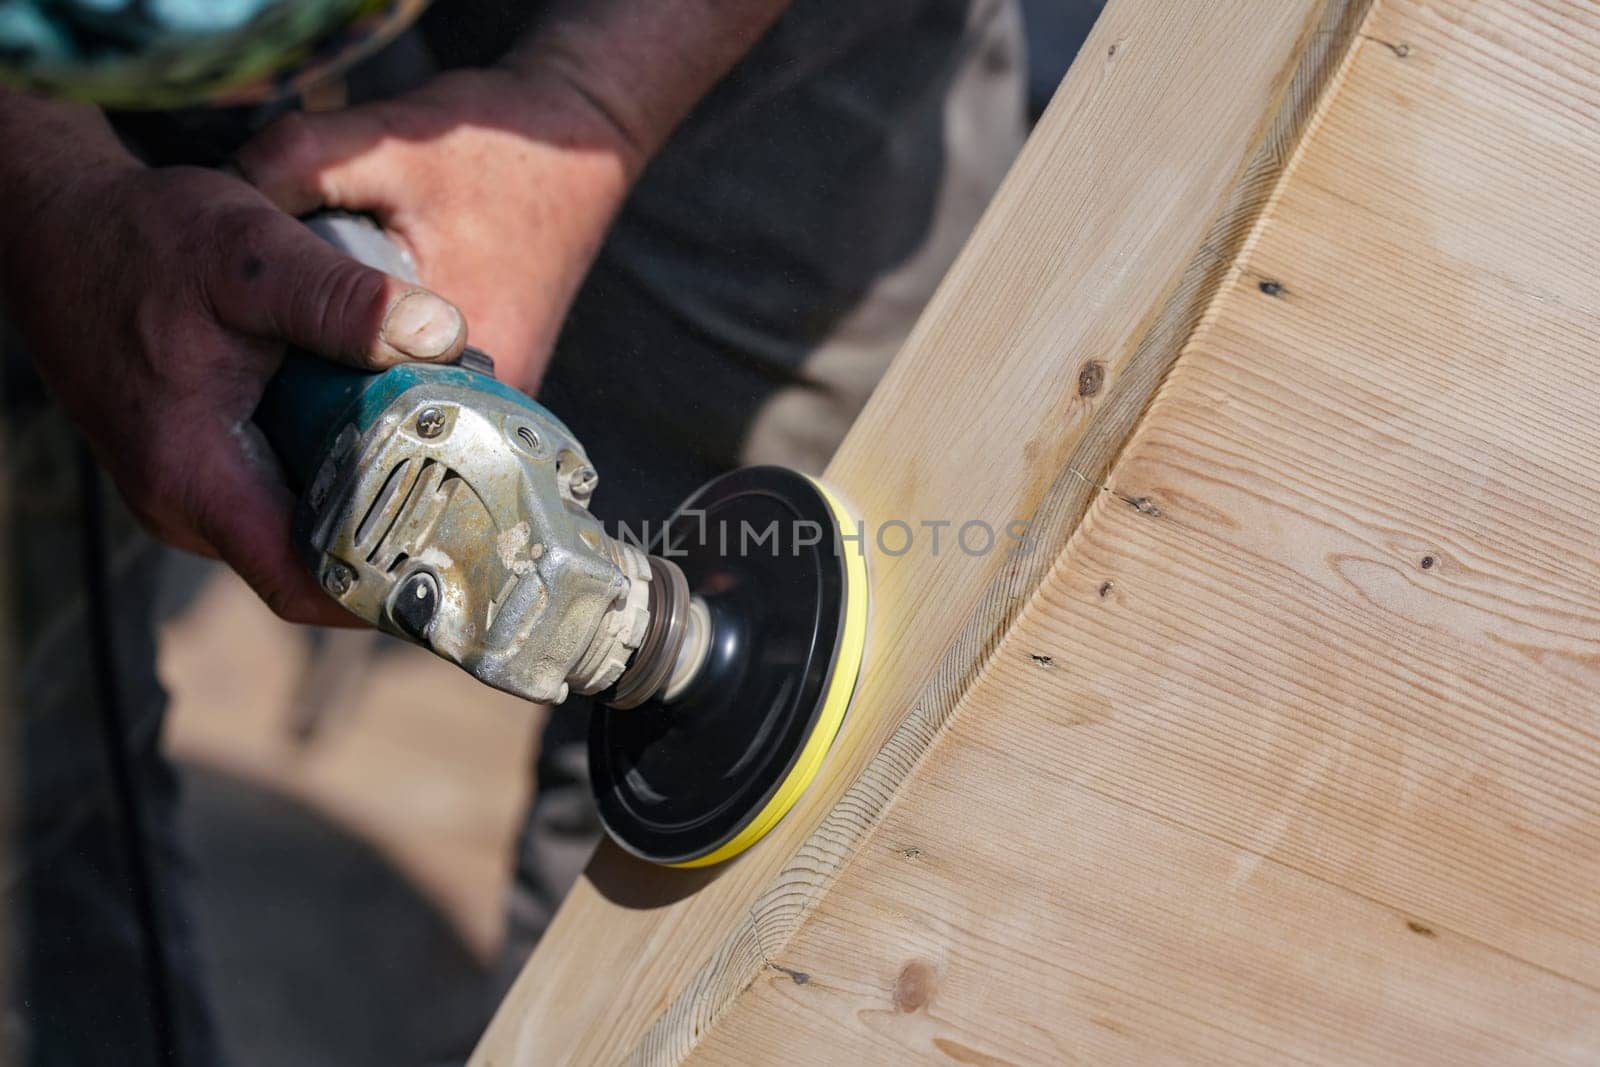 Man polishing wooden chest with old angle grinder during sunny day, closeup detail to hands without gloves.